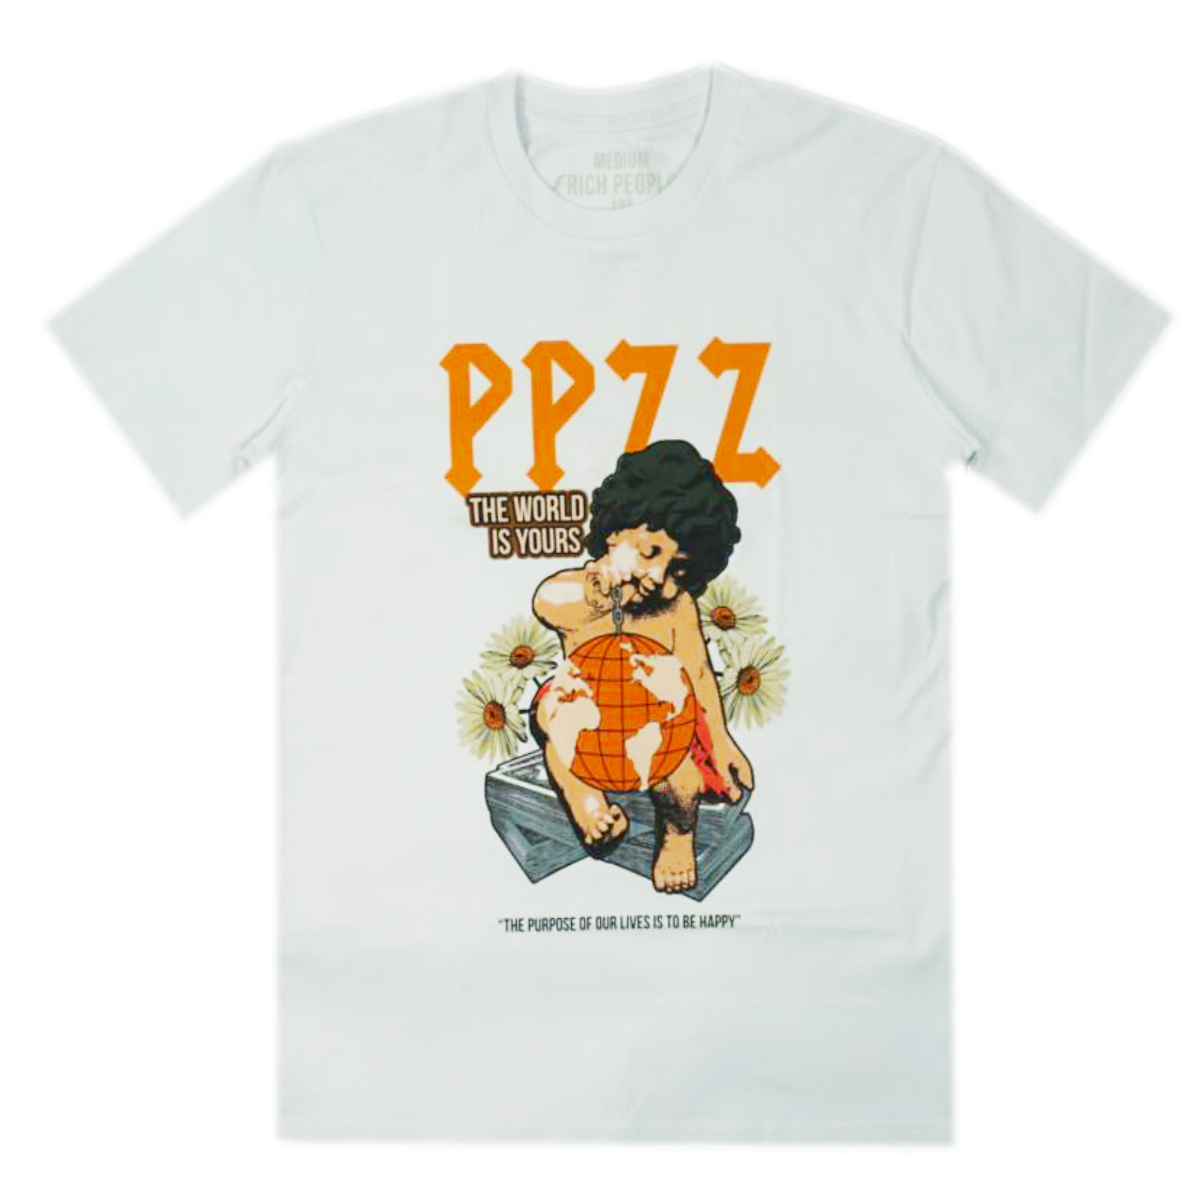 PPZZ x Rich People The World Is Yours Tee (Org/Wte) /D4